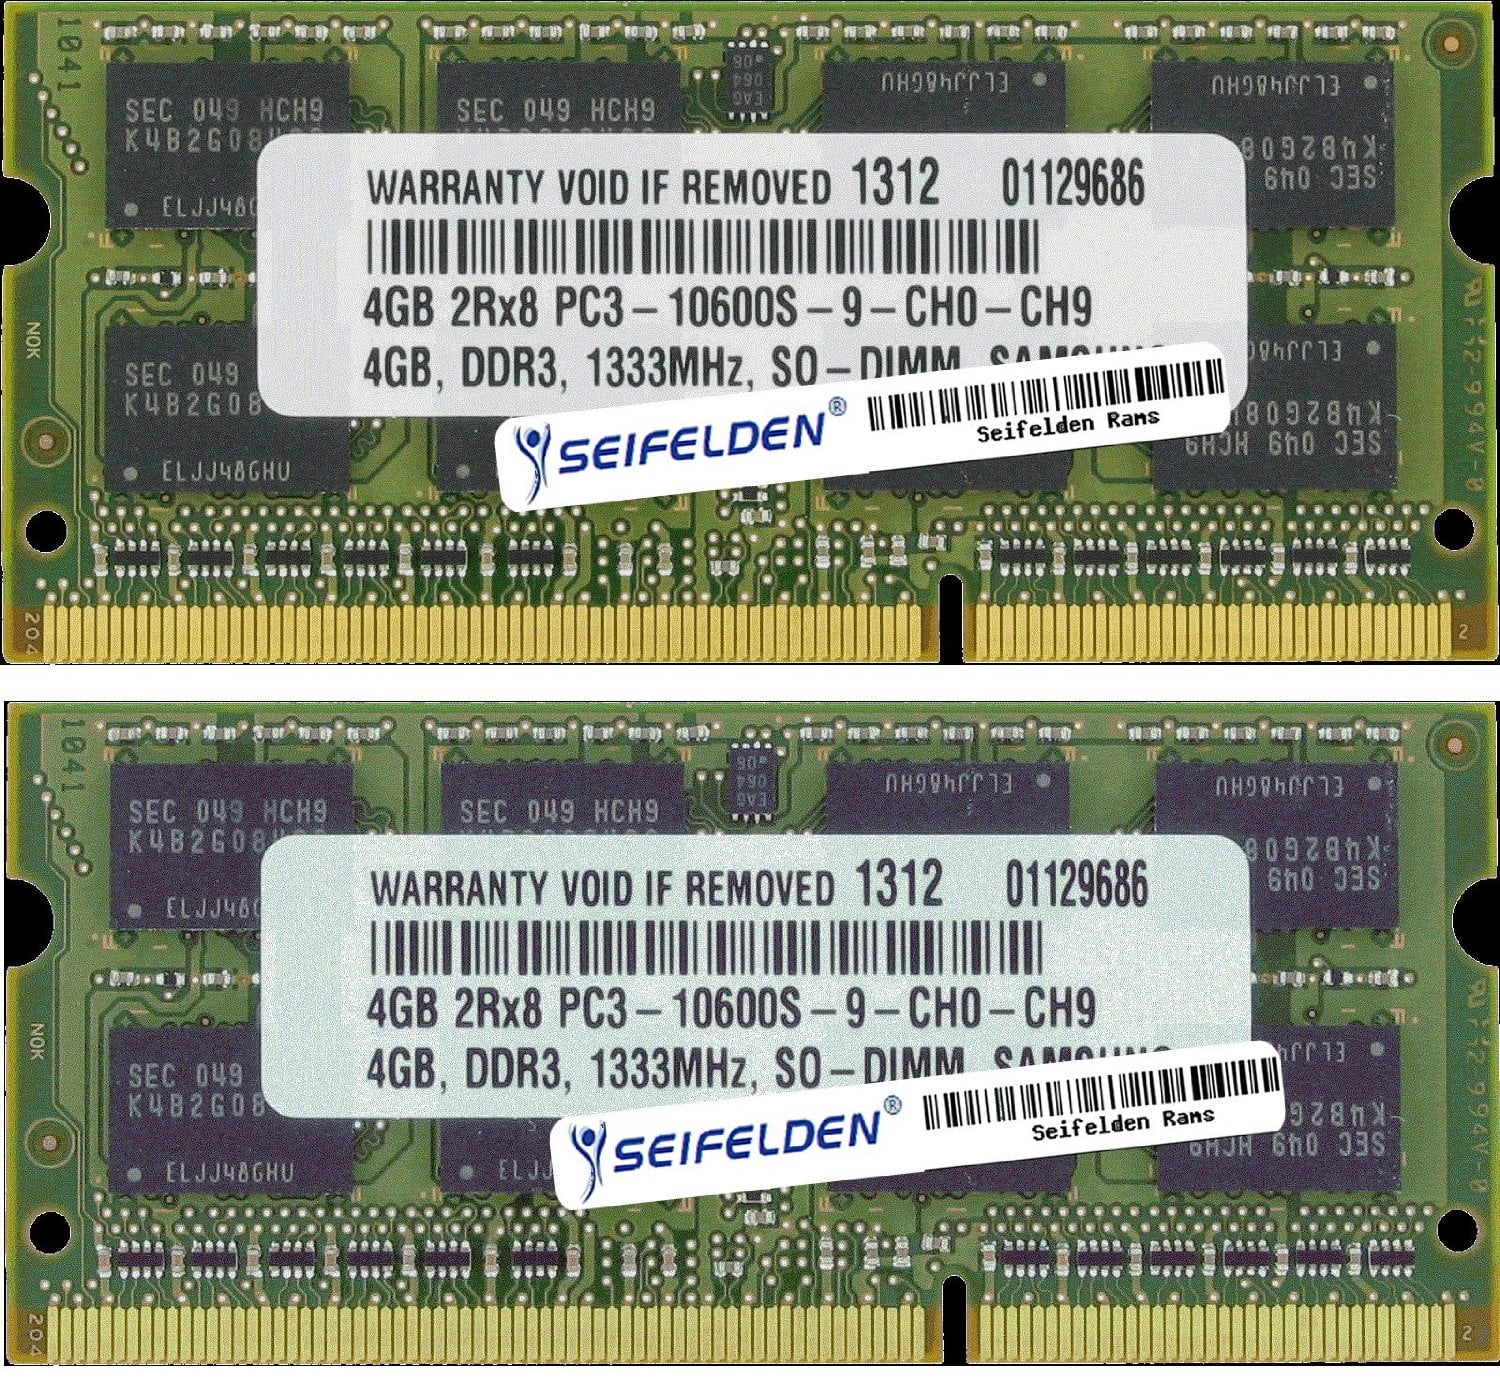 2GB Team High Performance Memory RAM Upgrade Single Stick For Toshiba Satellite U300-NS1 L300/F00 Laptop The Memory Kit comes with Life Time Warranty.